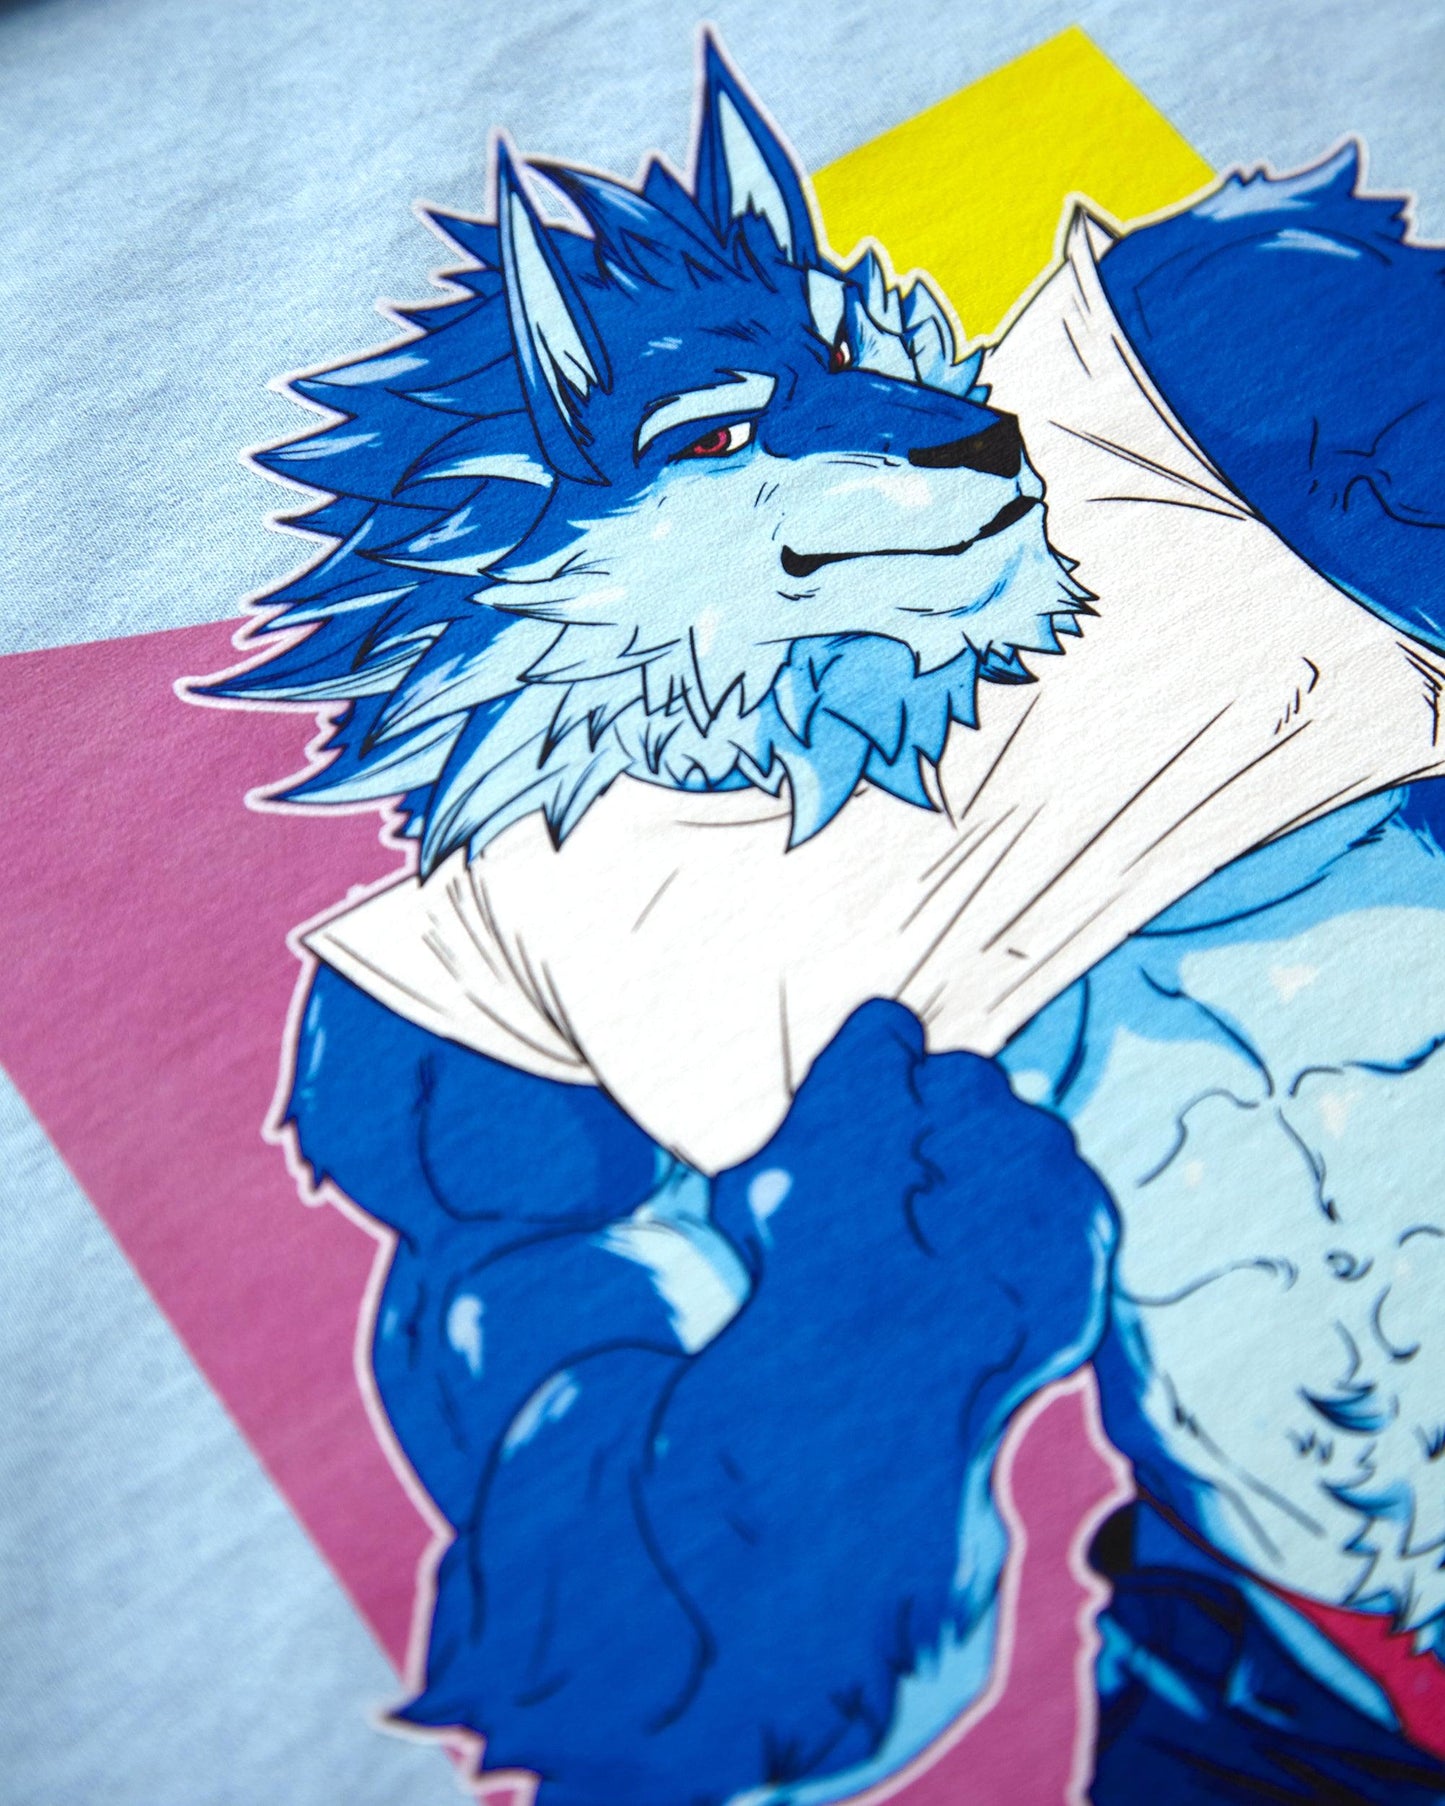 Magnus the wolf on blue - mens cropped tee / crop top - HOMOLONDON